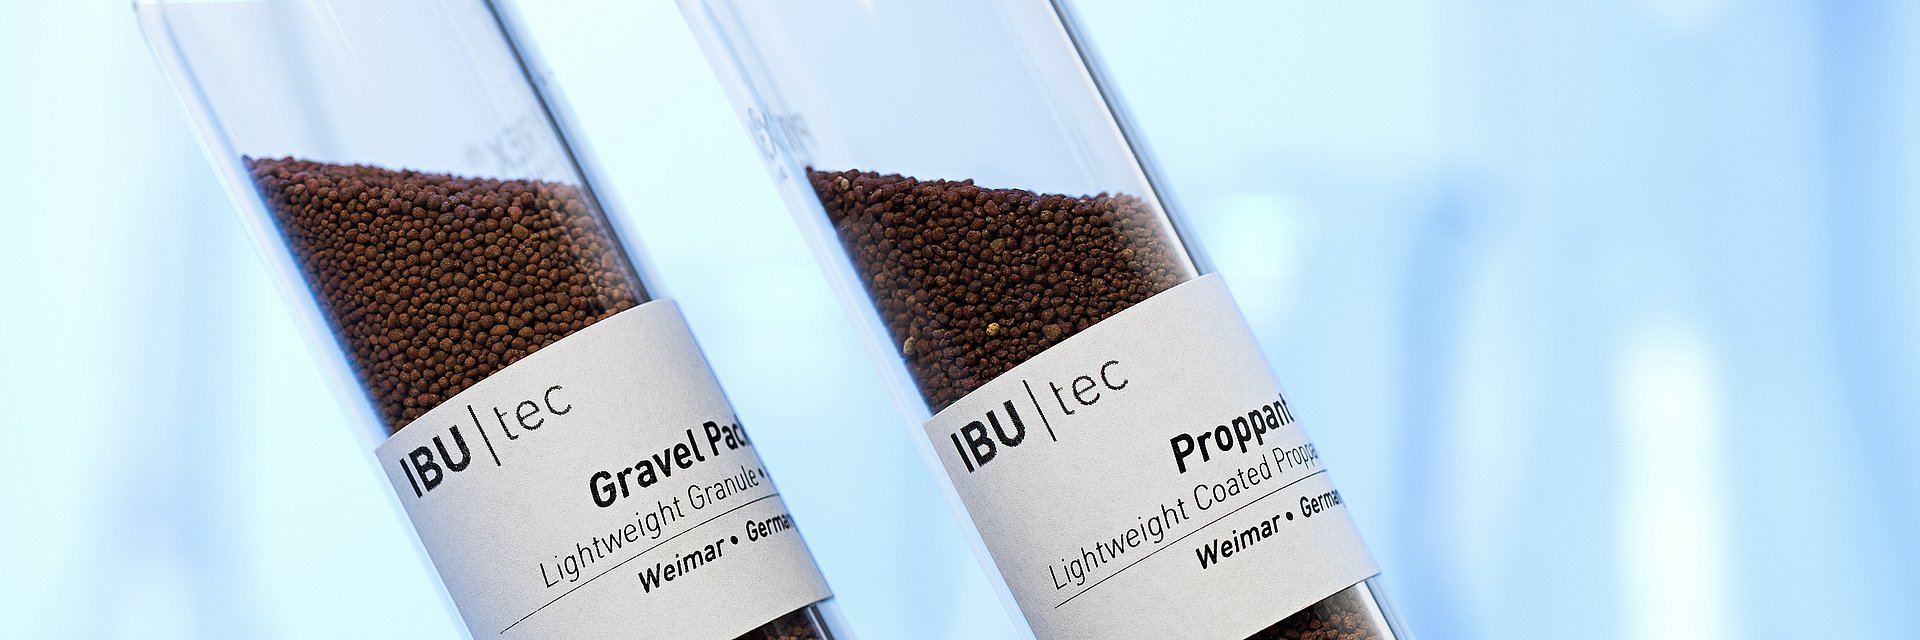 proppants and gravel pack in test tubes for mining or extraction of oil or gas from IBU-tec development